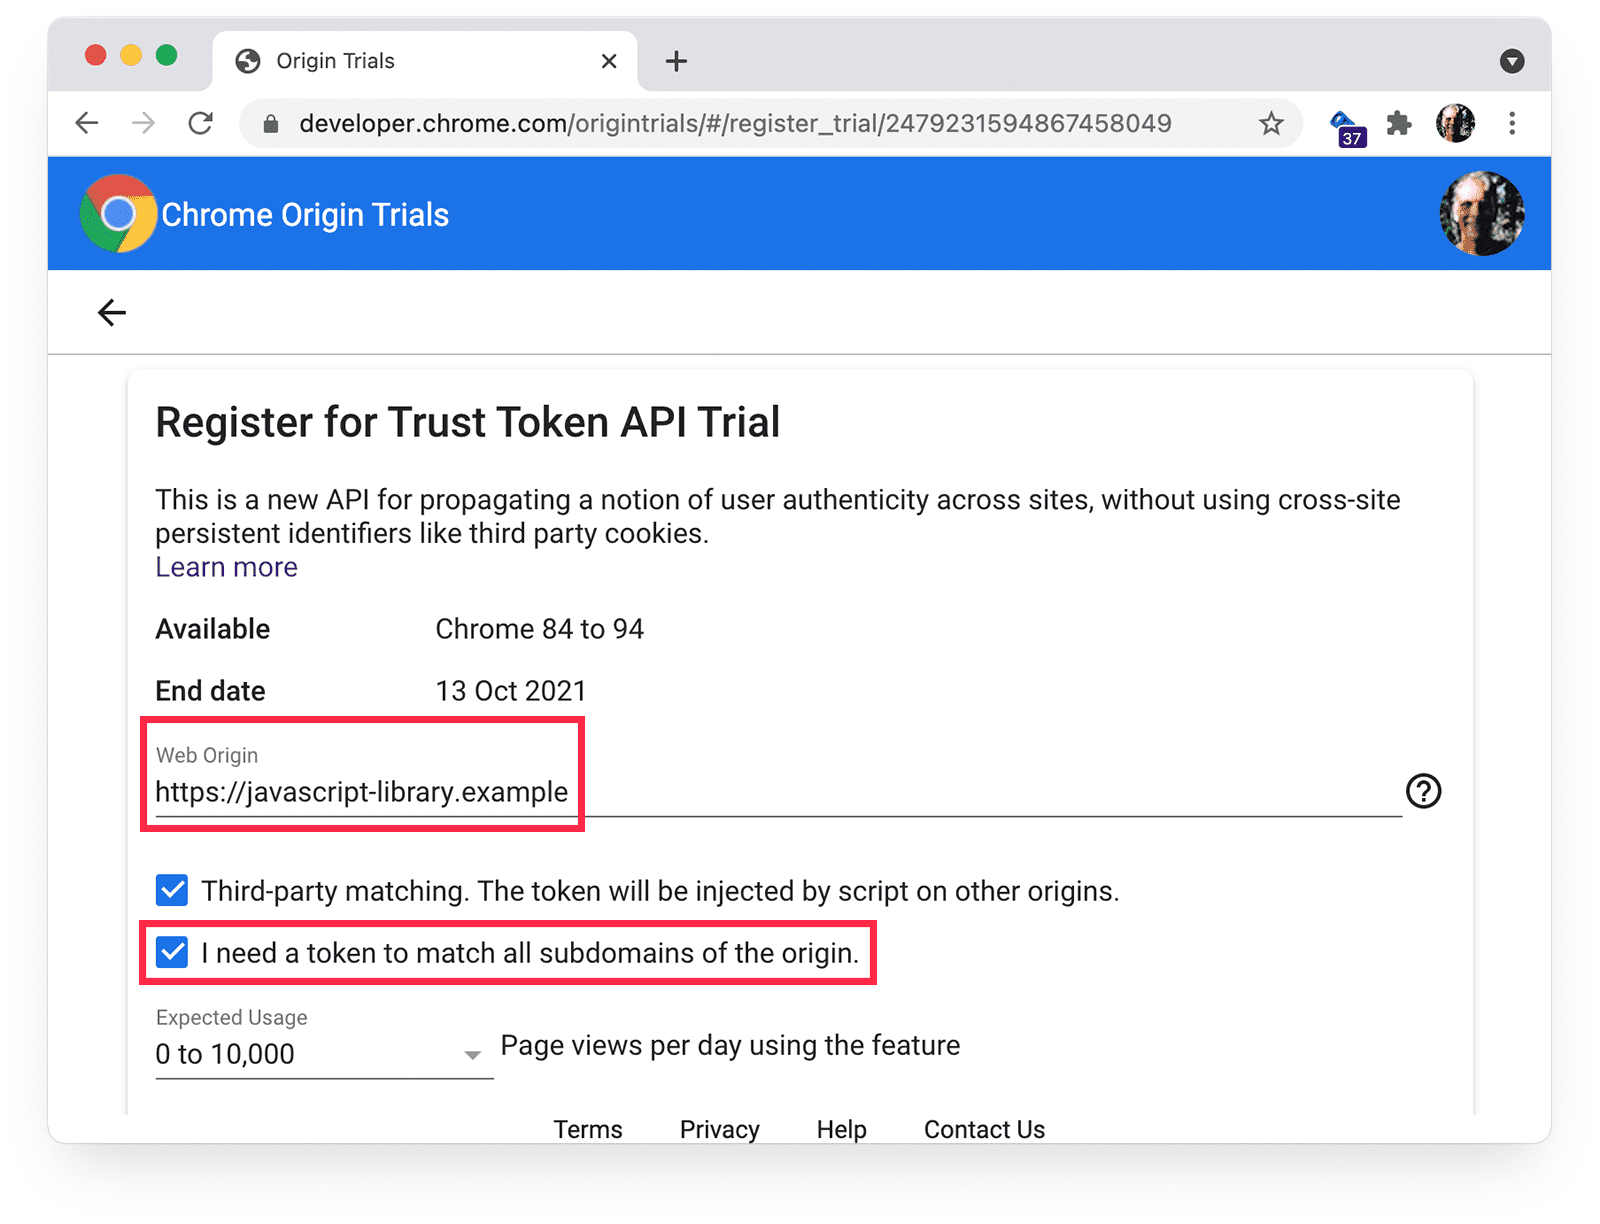 Chrome origin trials 
registration page showing third-party matching and subdomain-matching selected